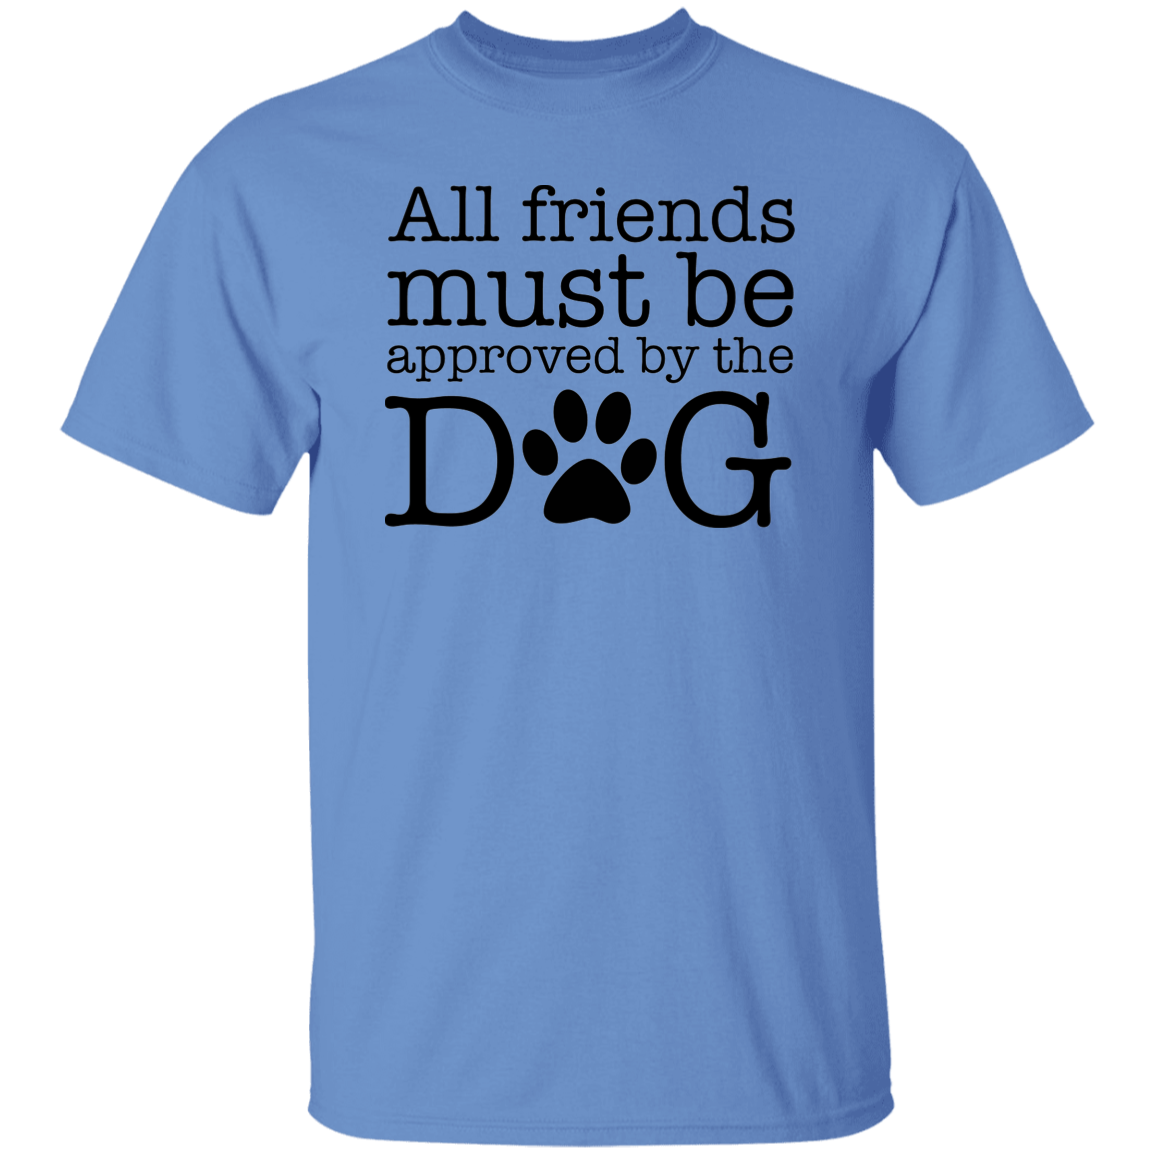 All My Friends Must Be Approved by the Dog  5.3 oz. T-Shirt